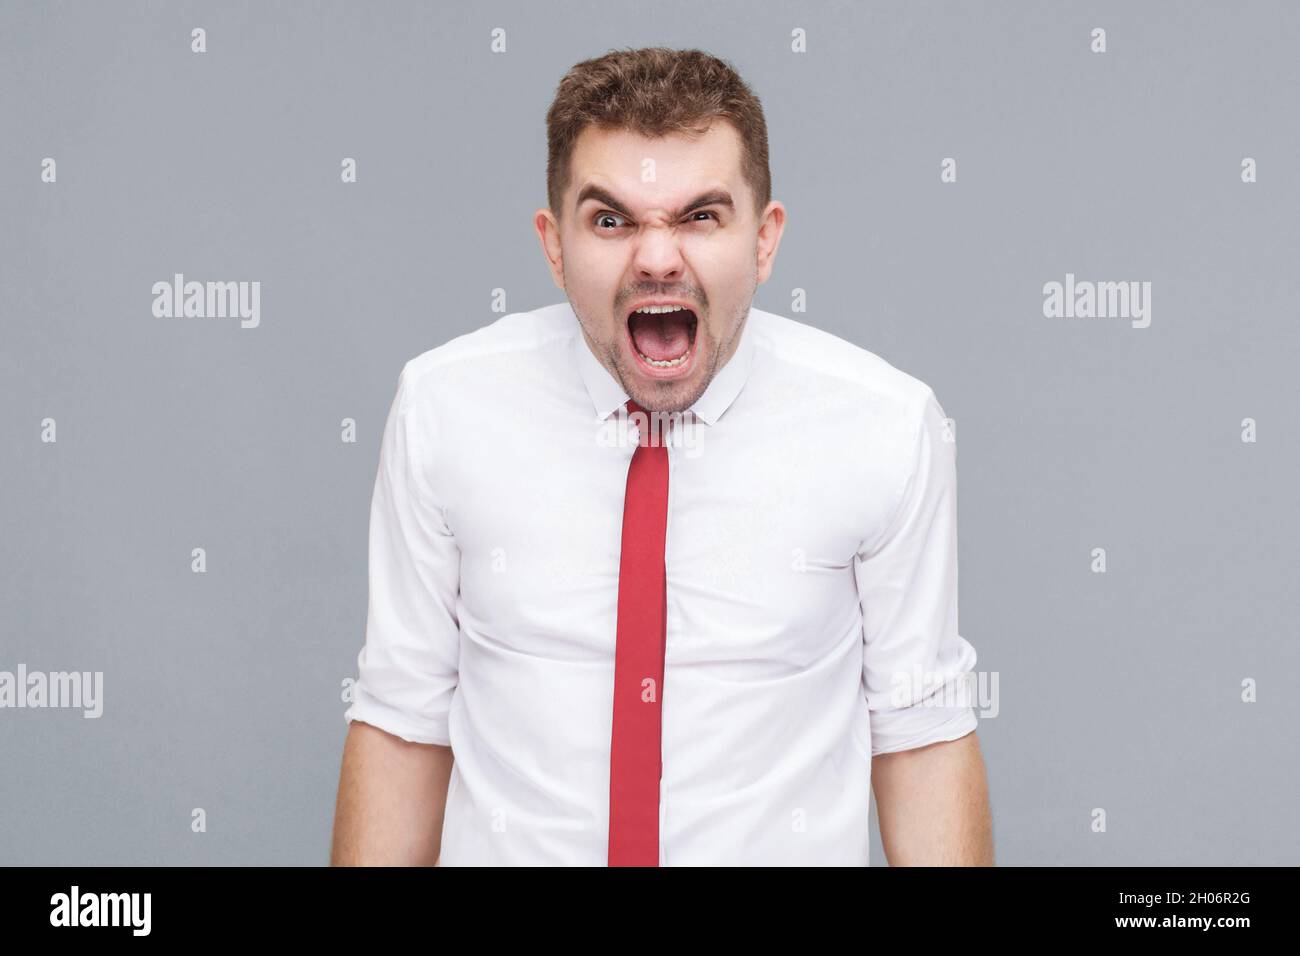 Portrait of young angry crazy man in white shirt and tie standing and screaming. indoor isolated on gray background. Stock Photo